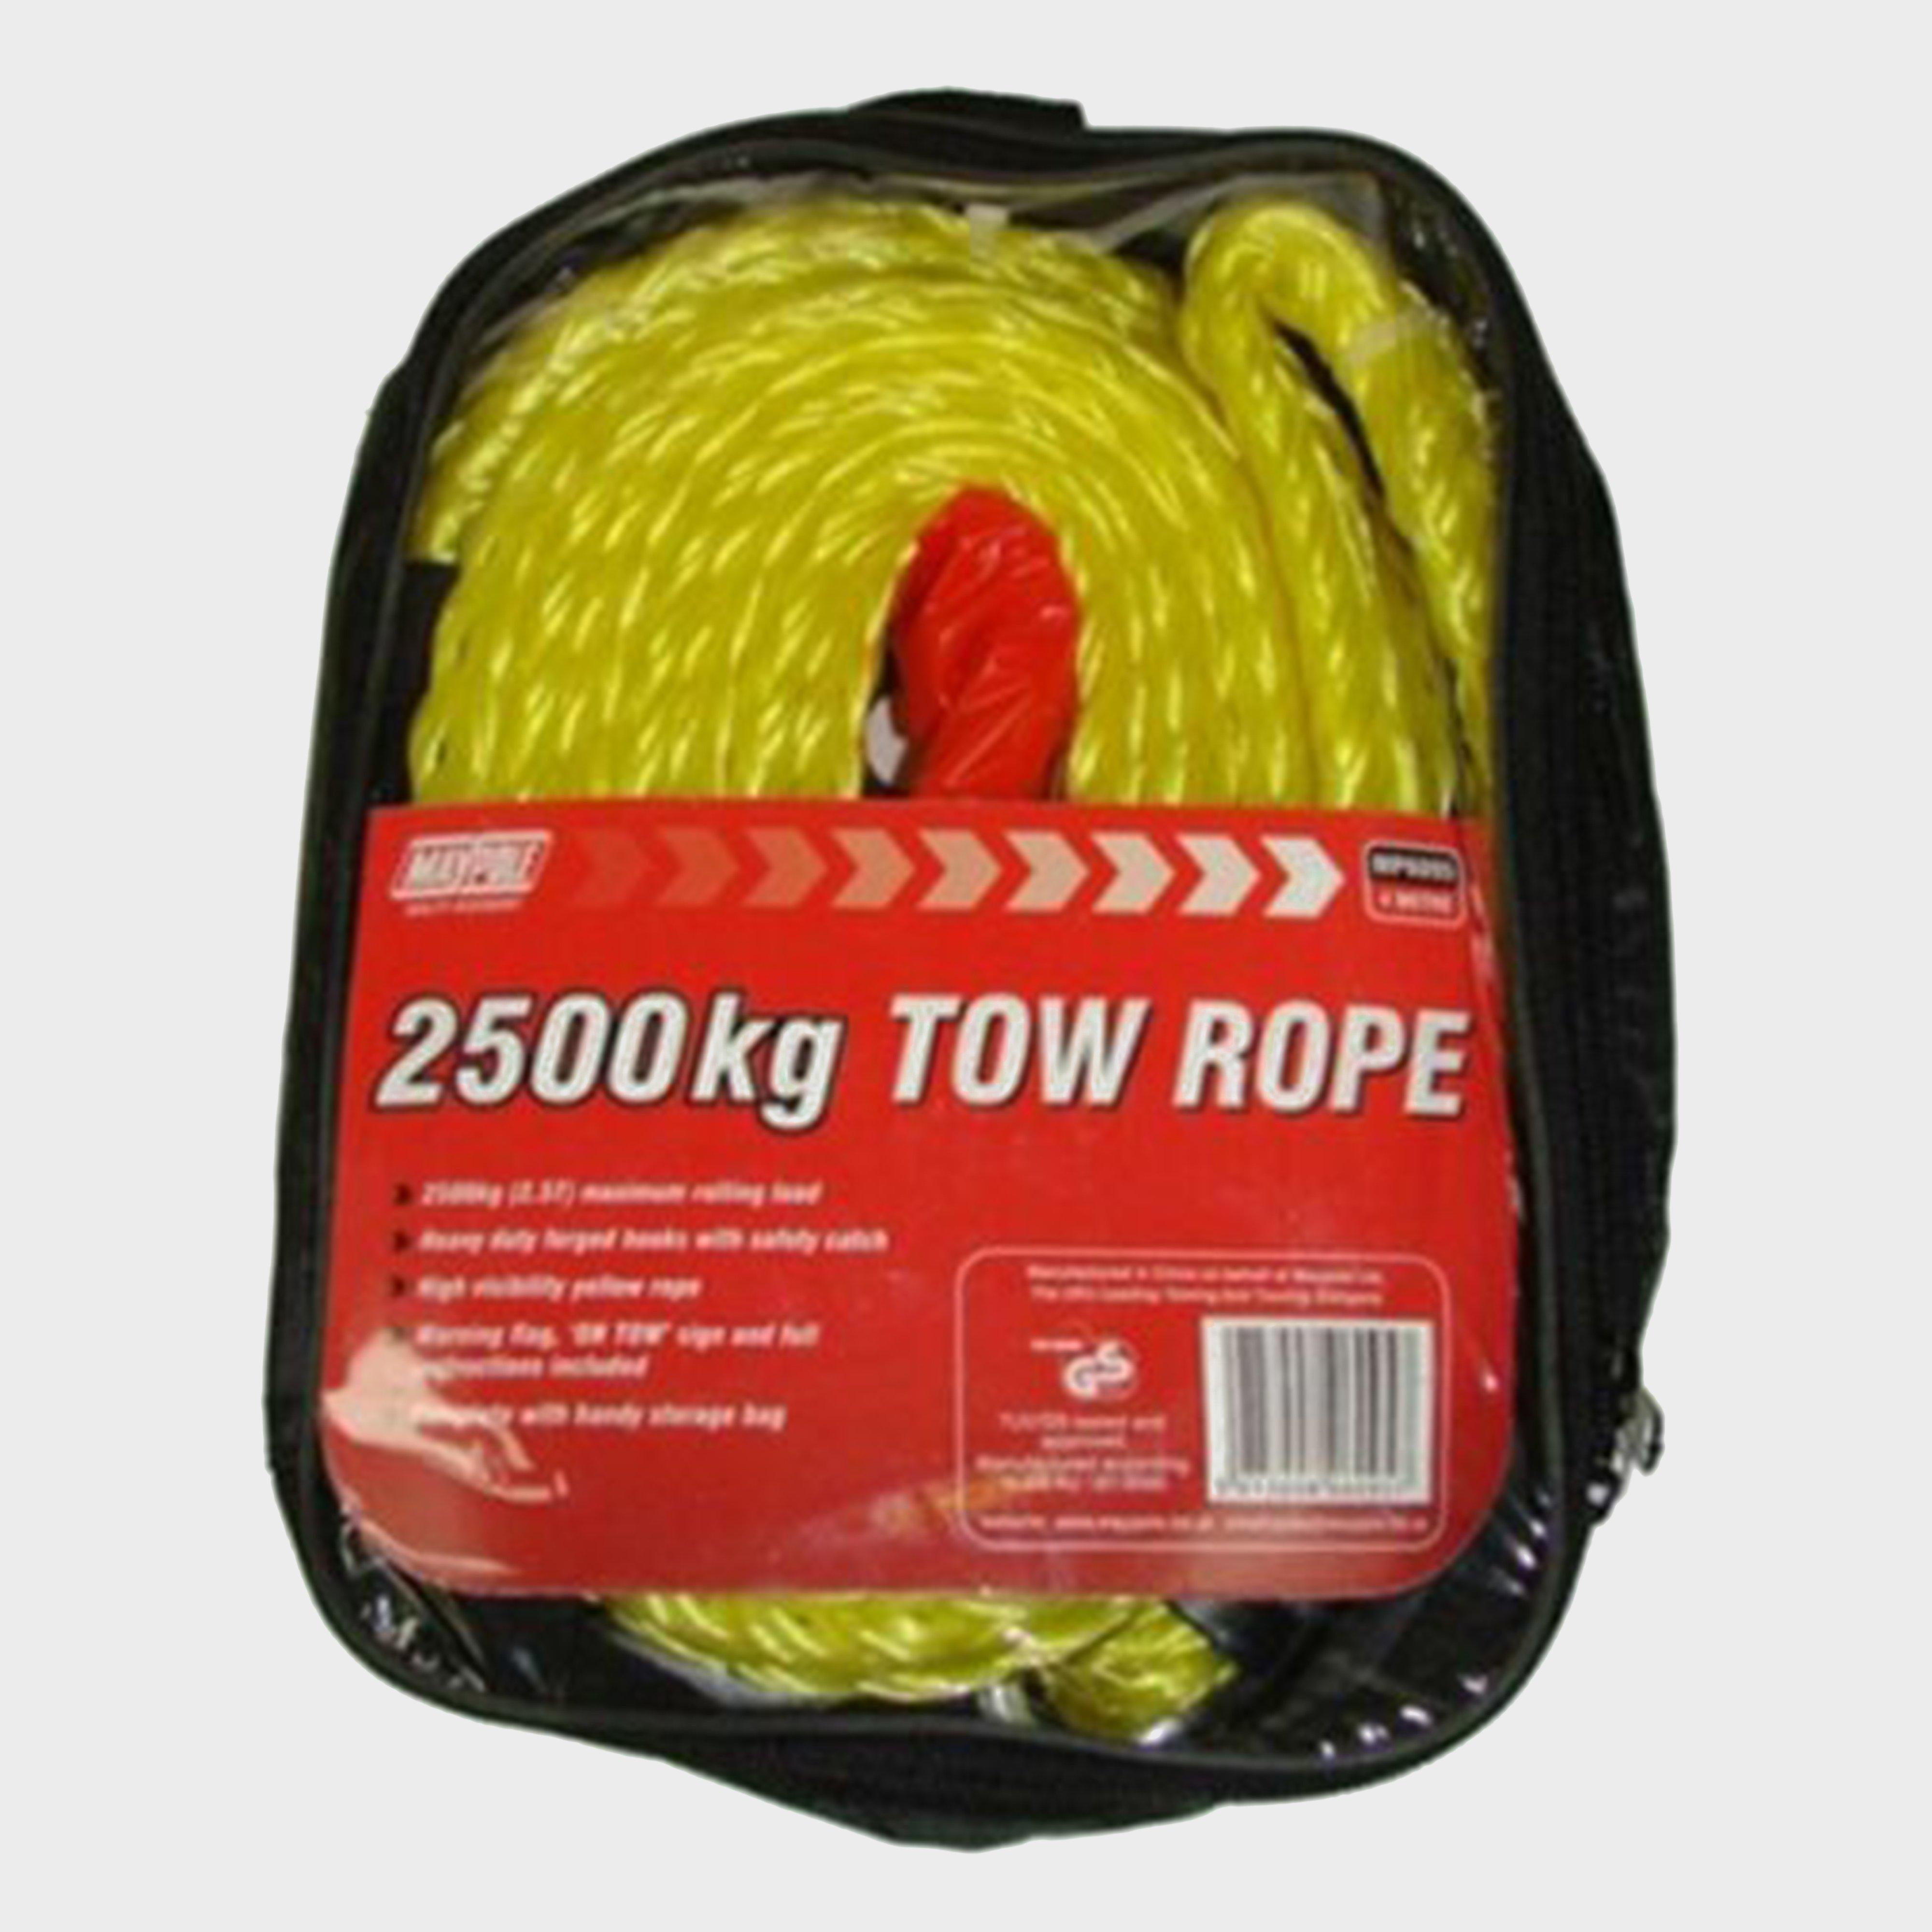 Maypole 3.5m X 2500kg Tow Rope  Yellow